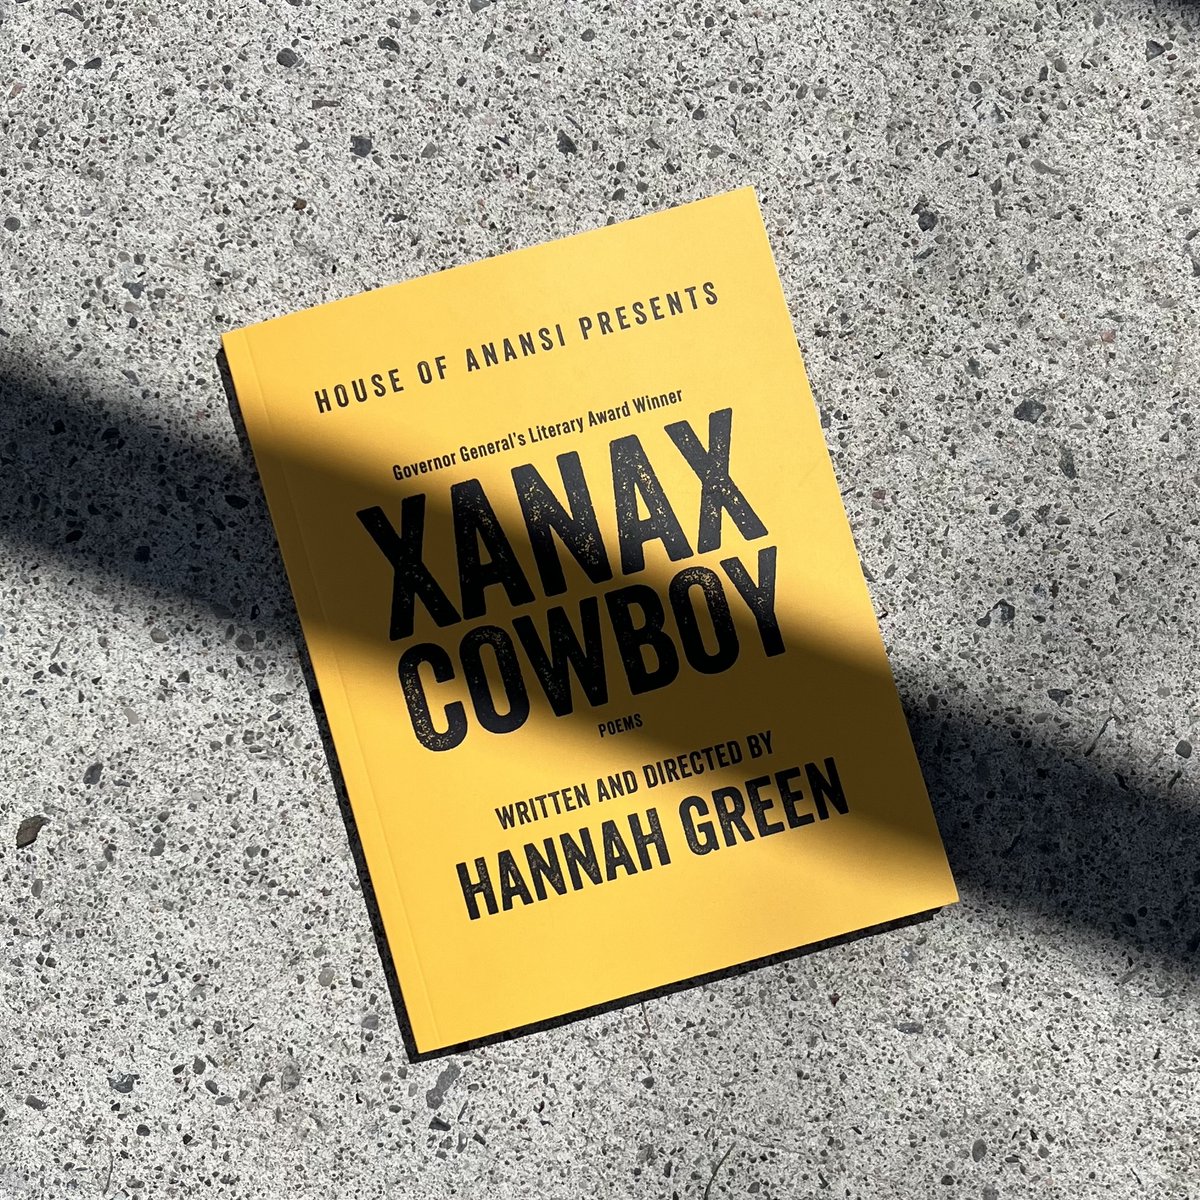 XANAX COWBOY is the winner of the Gerald Lampert Memorial Award! 🤠💛 Congratulations to author @xanaxcowboy_, and thank you @CanadianPoets! ✨